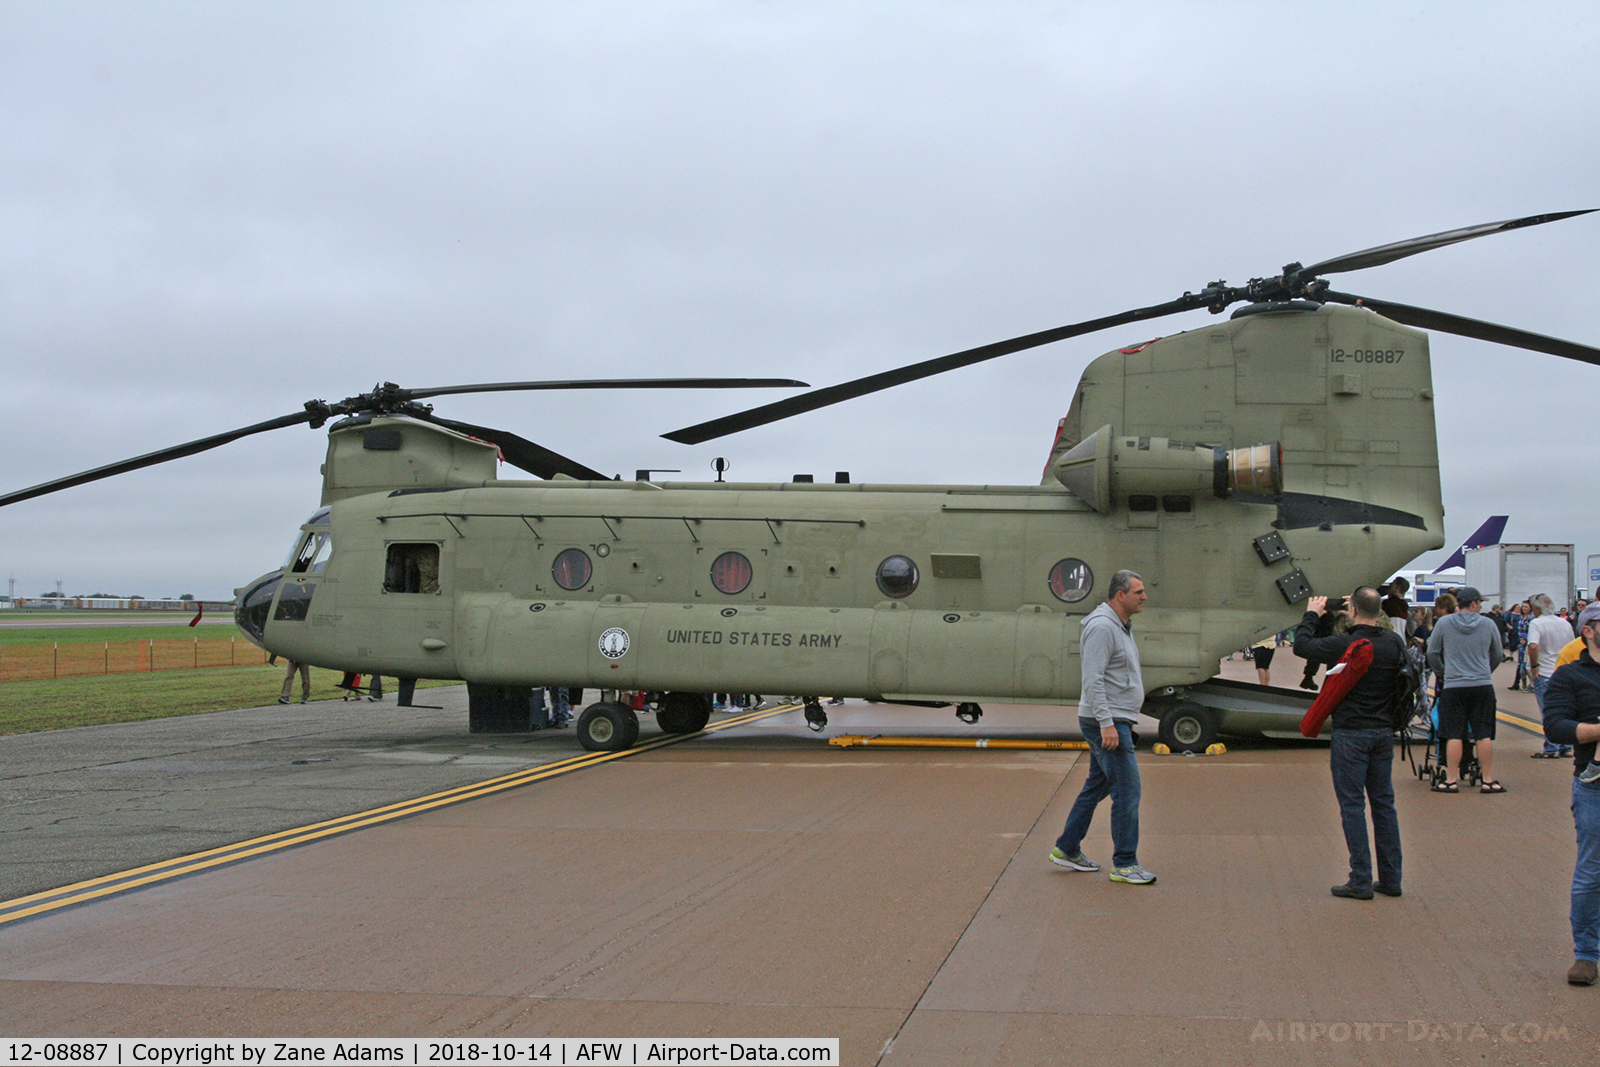 12-08887, 2012 Boeing CH-47F Chinook C/N M8887, At the 2018 Alliance Airshow - Fort Worth, TX